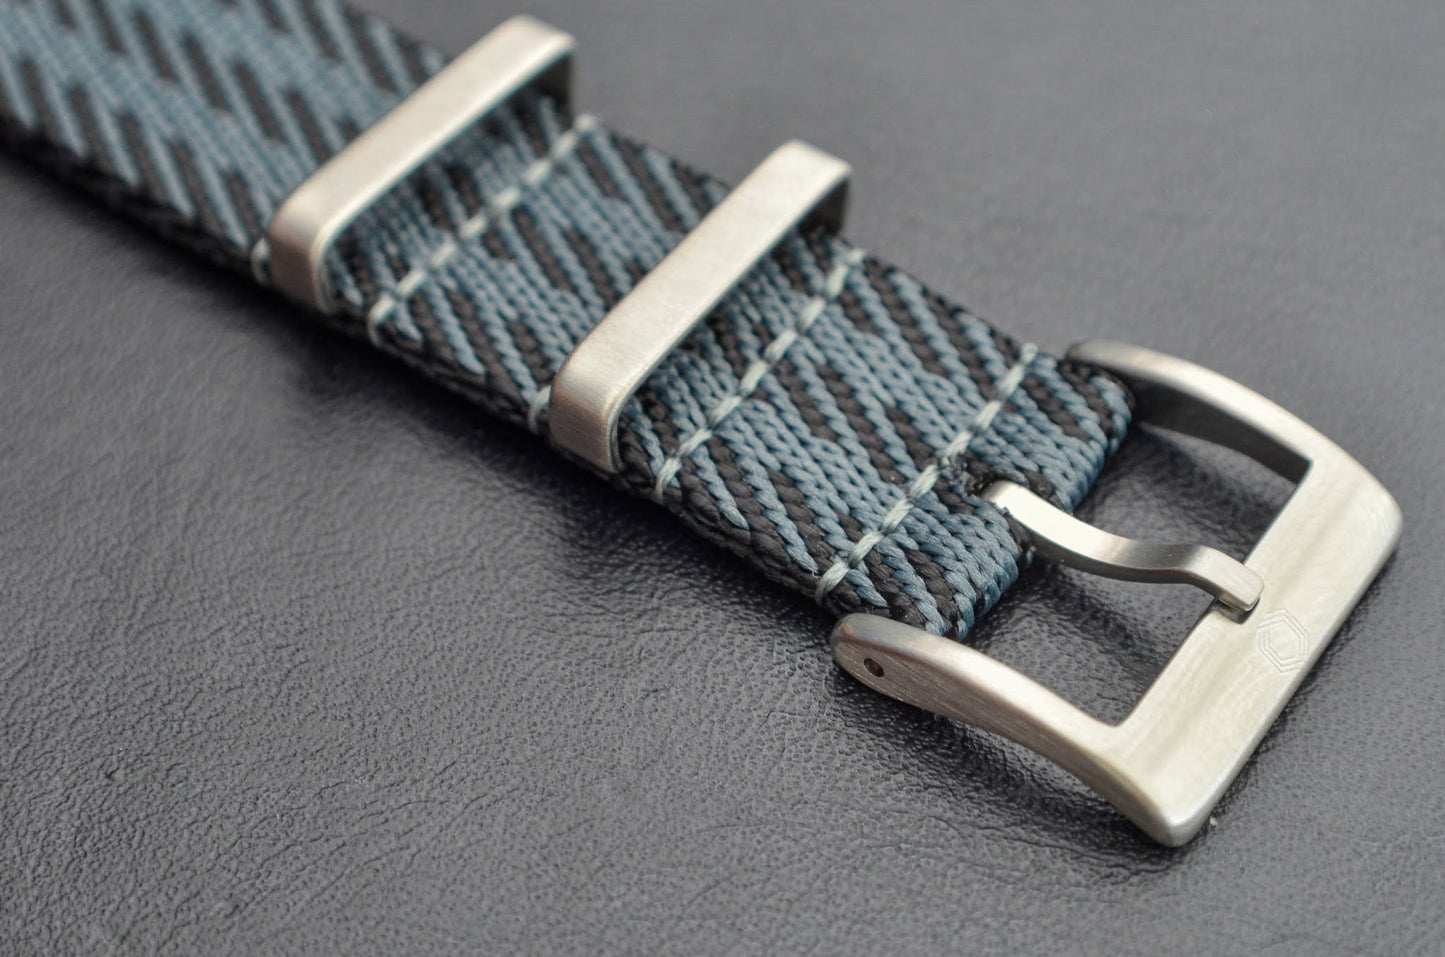 The 'St. James' - Traditional 'Bond' military watch strap made of a soft double weaved nylon